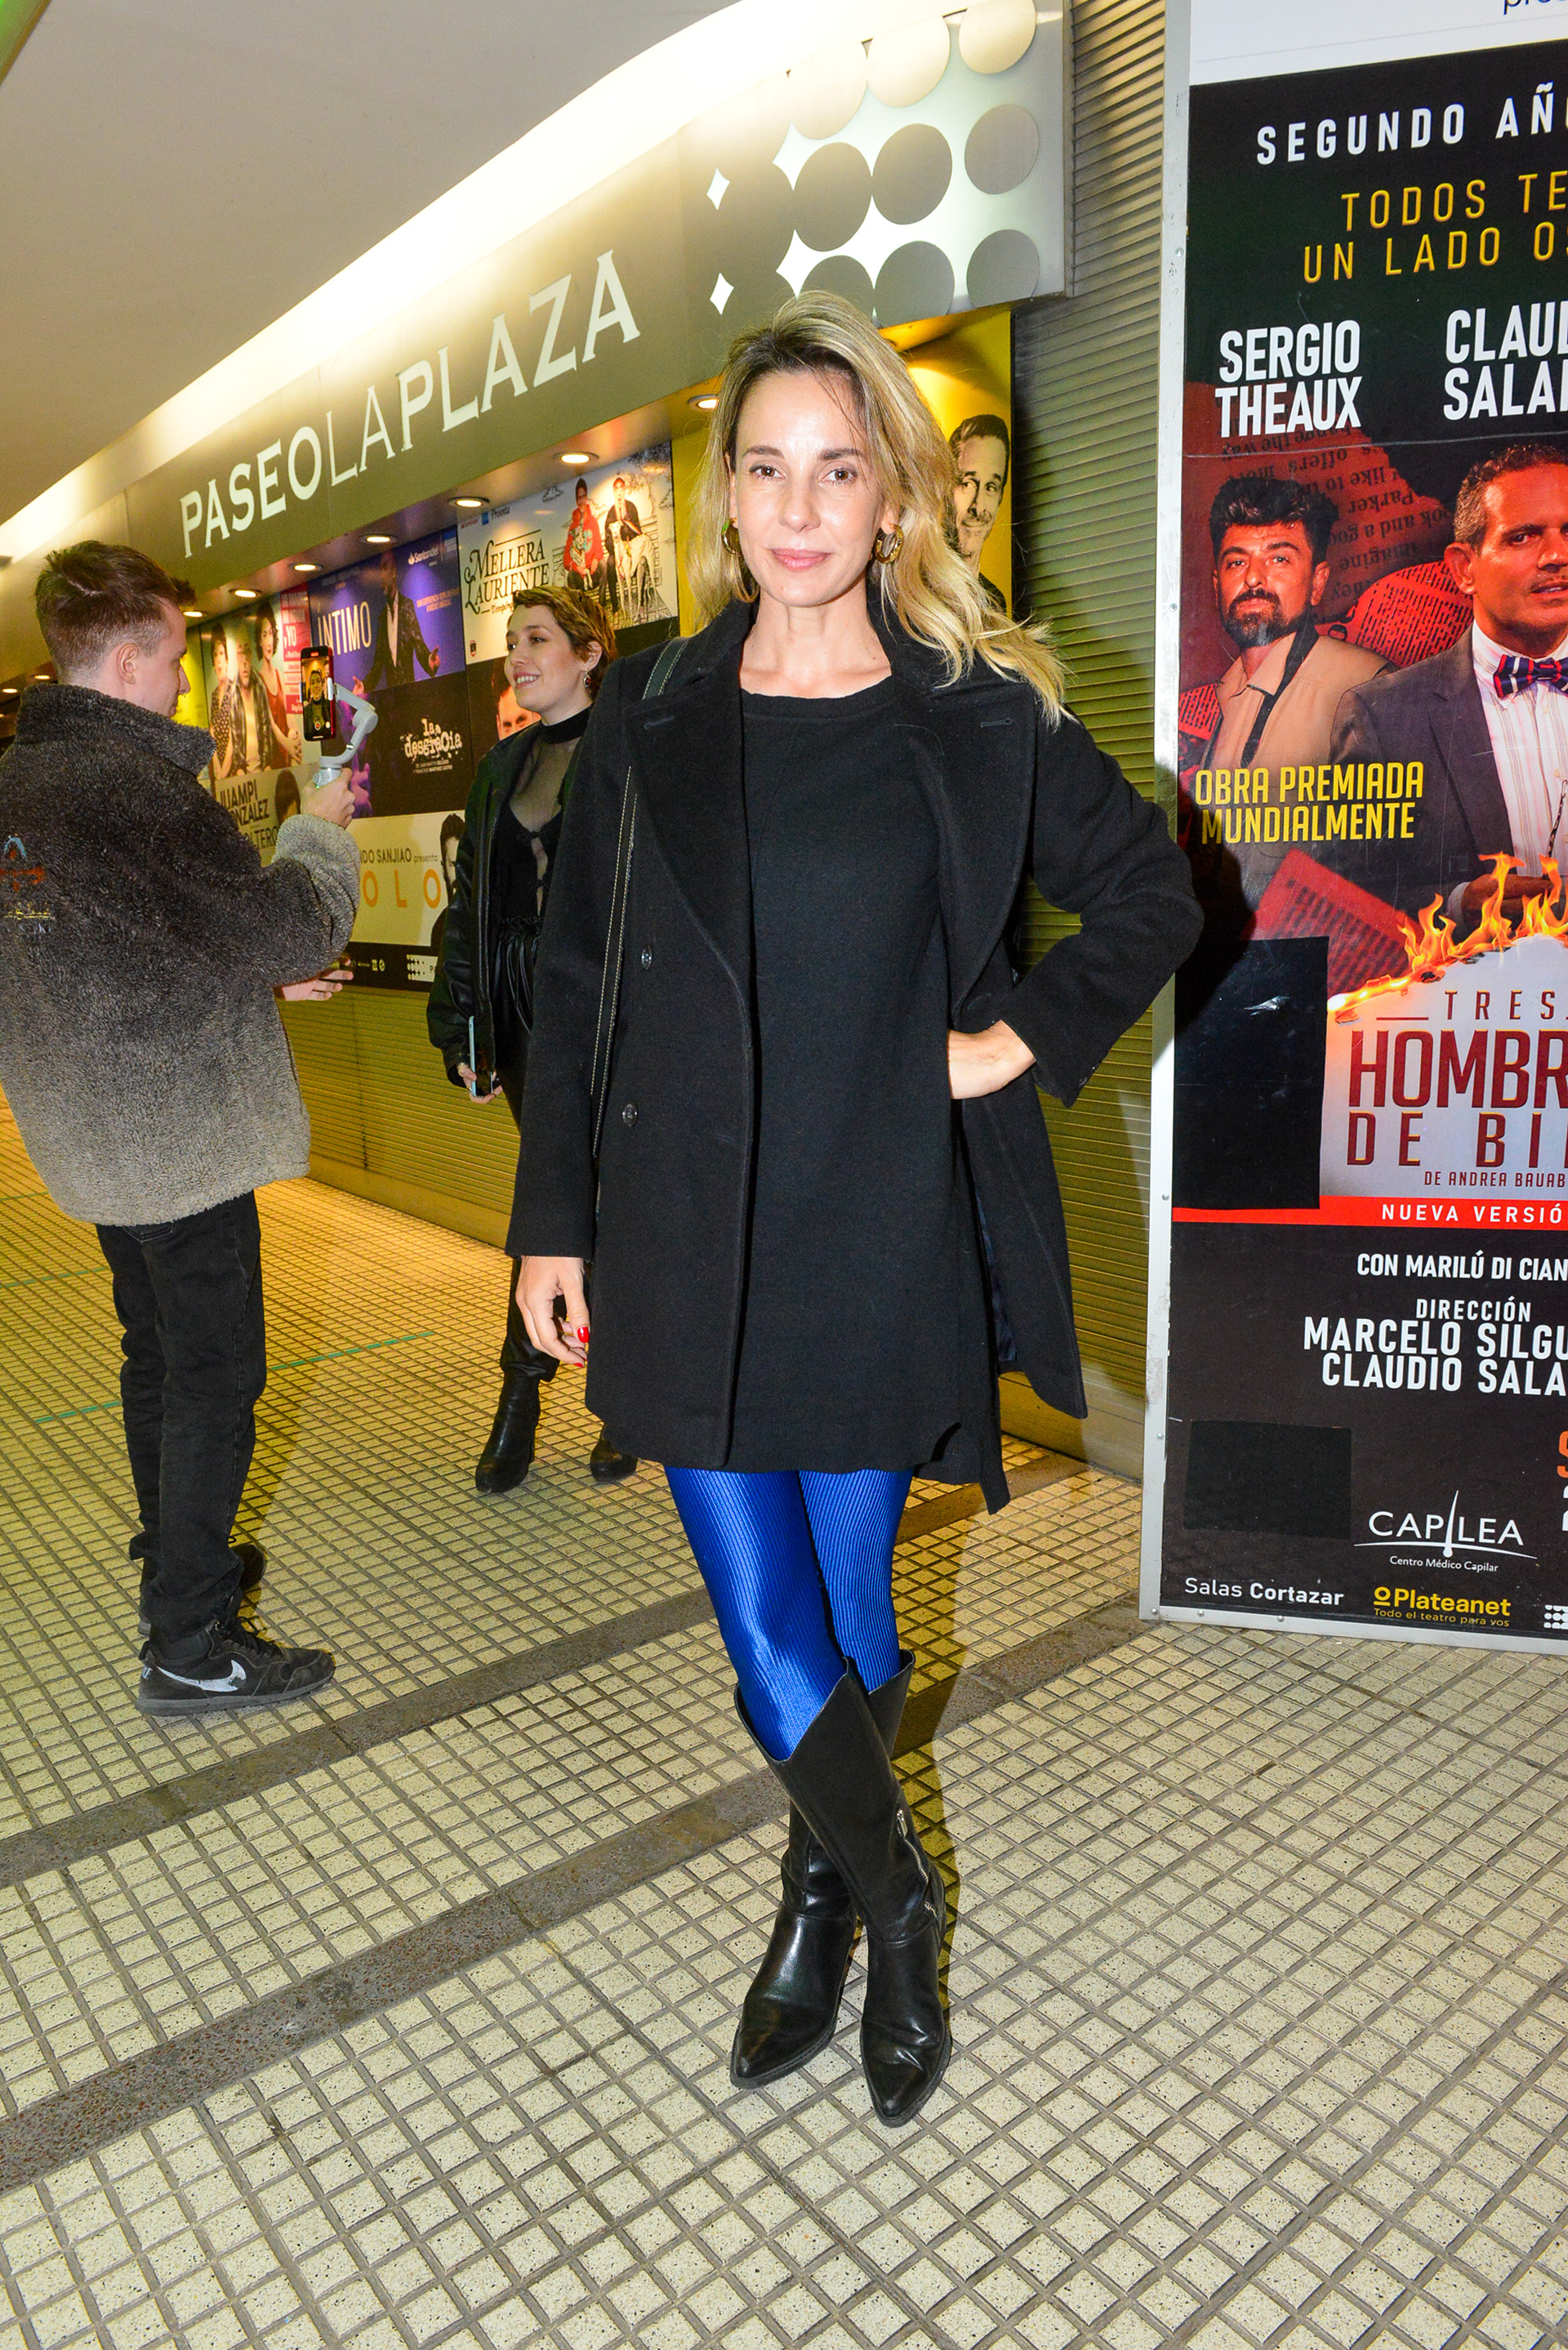 Juliette Cardinelli stuns by wearing her blue tights at the premiere of the play